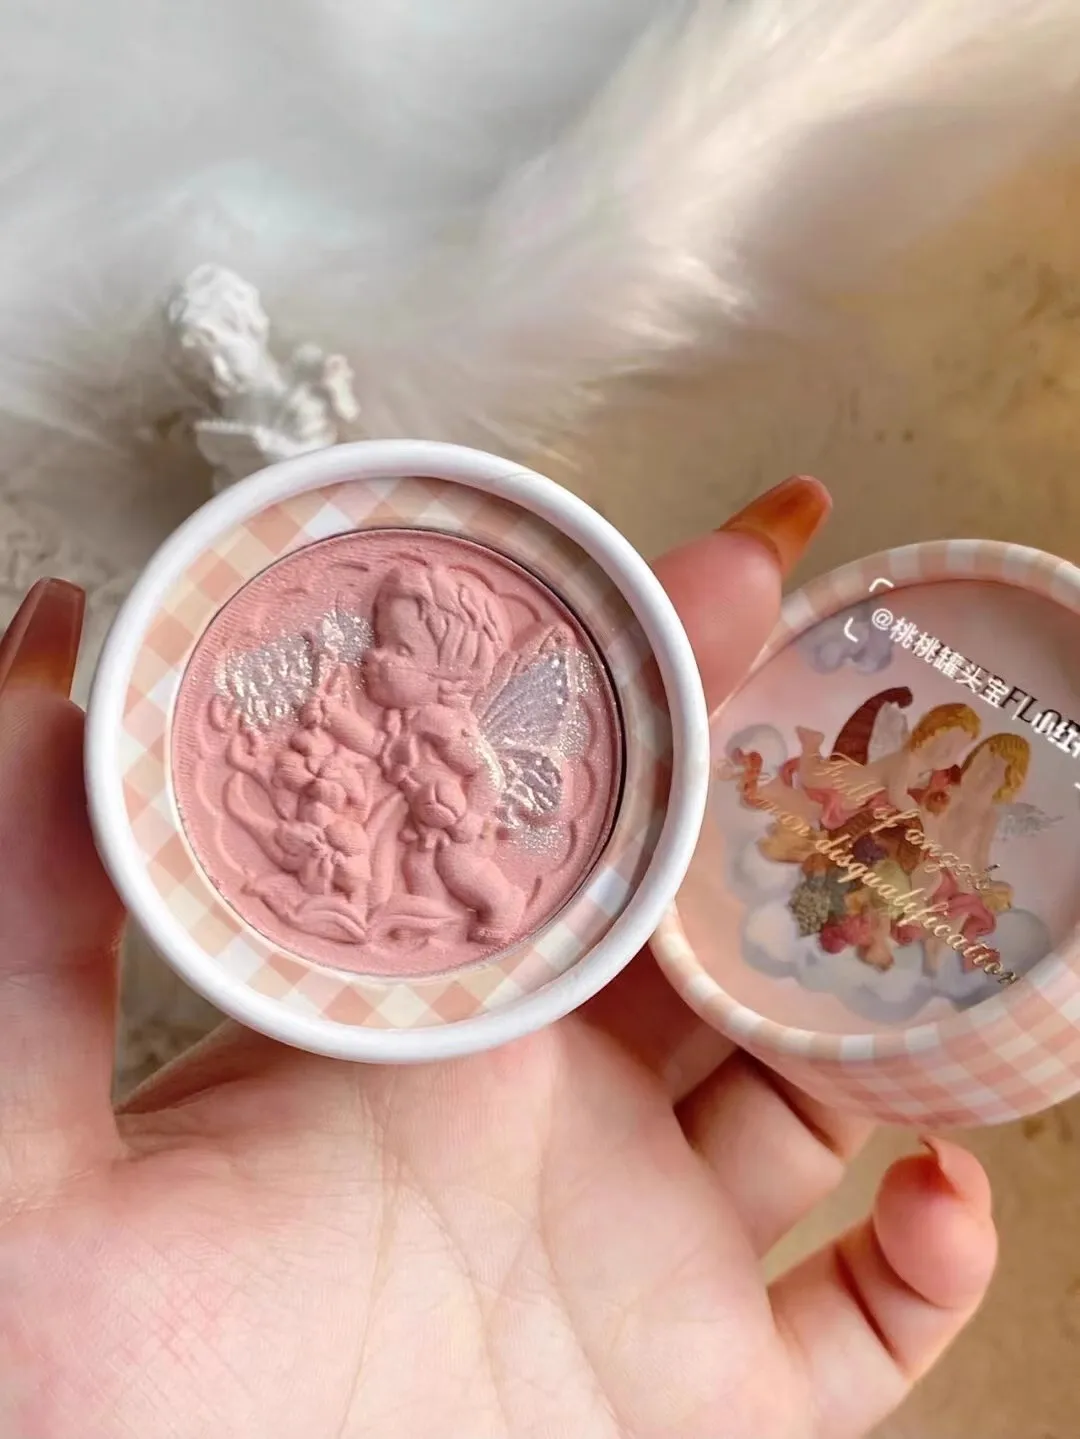 

Cheerflor Angel Embossed Blusher Face Blush Matte Natural Cheek Tint Brighten Contouring Soft Female Makeup Rare Beauty Cosmetic